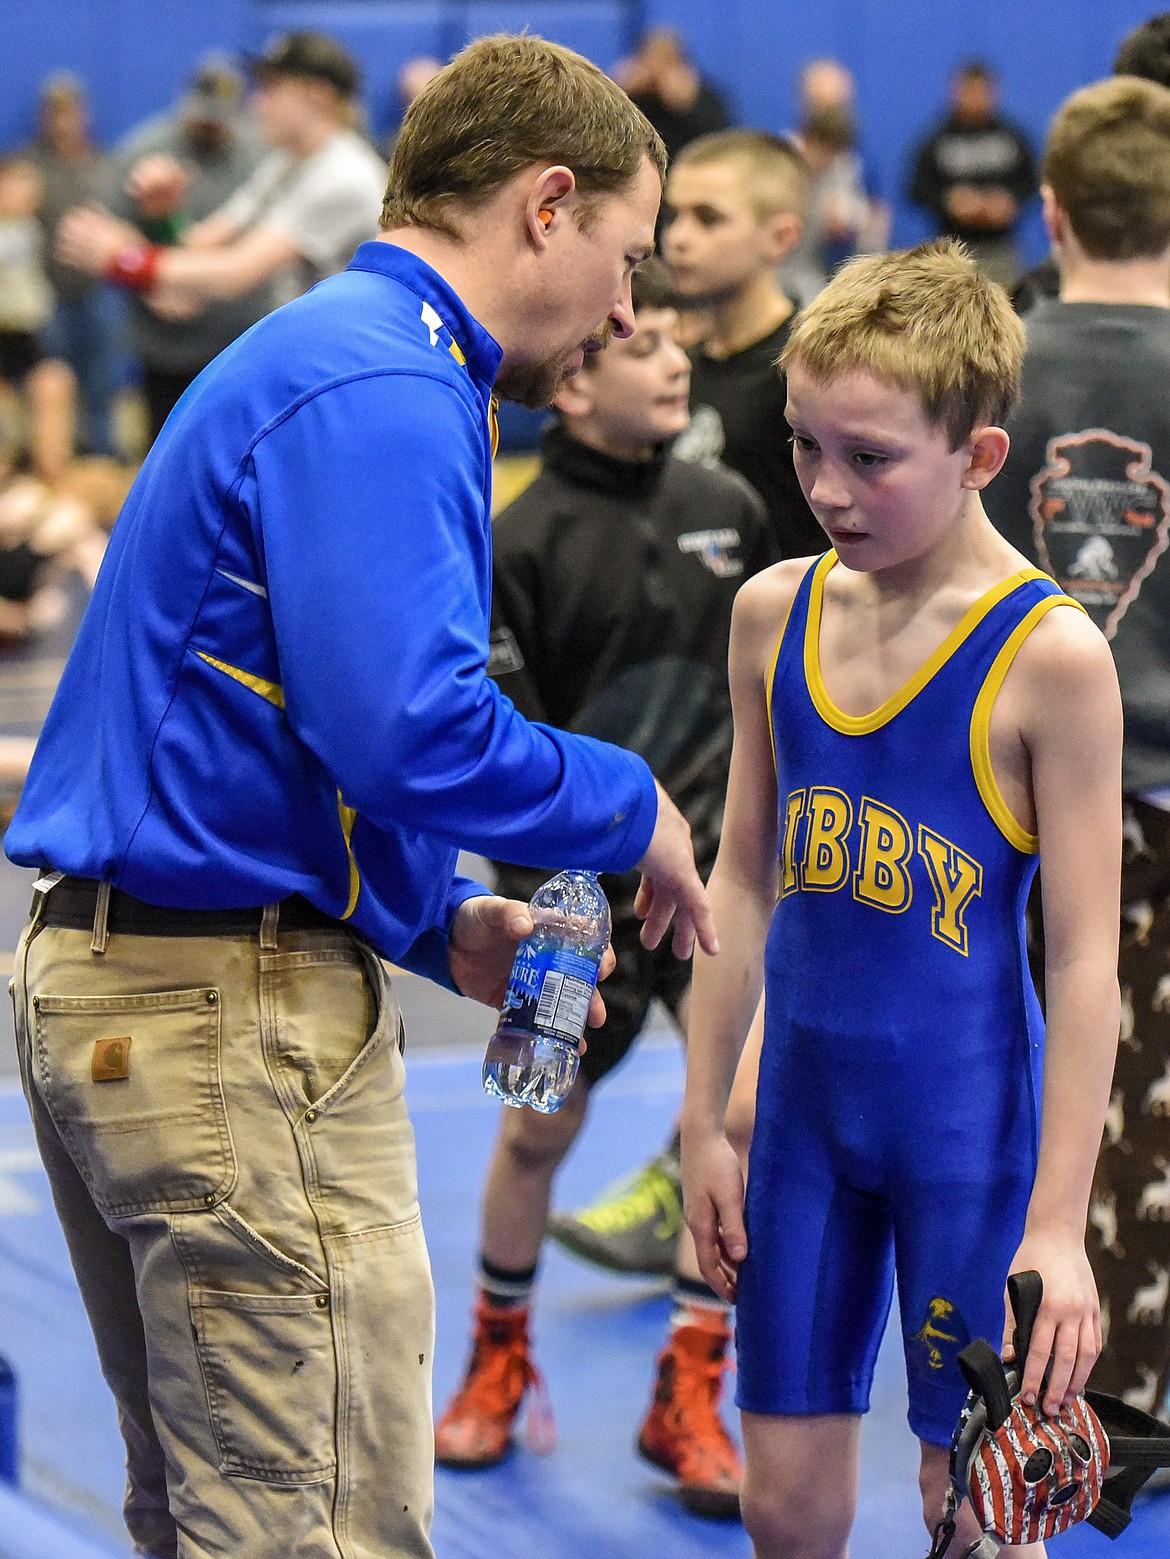 XXXXX XXXXX talks with Noah Leary of Libby after his match at the Kootenai Klassic Wrestling Tournament Saturday. (Ben Kibbey/The Western News)